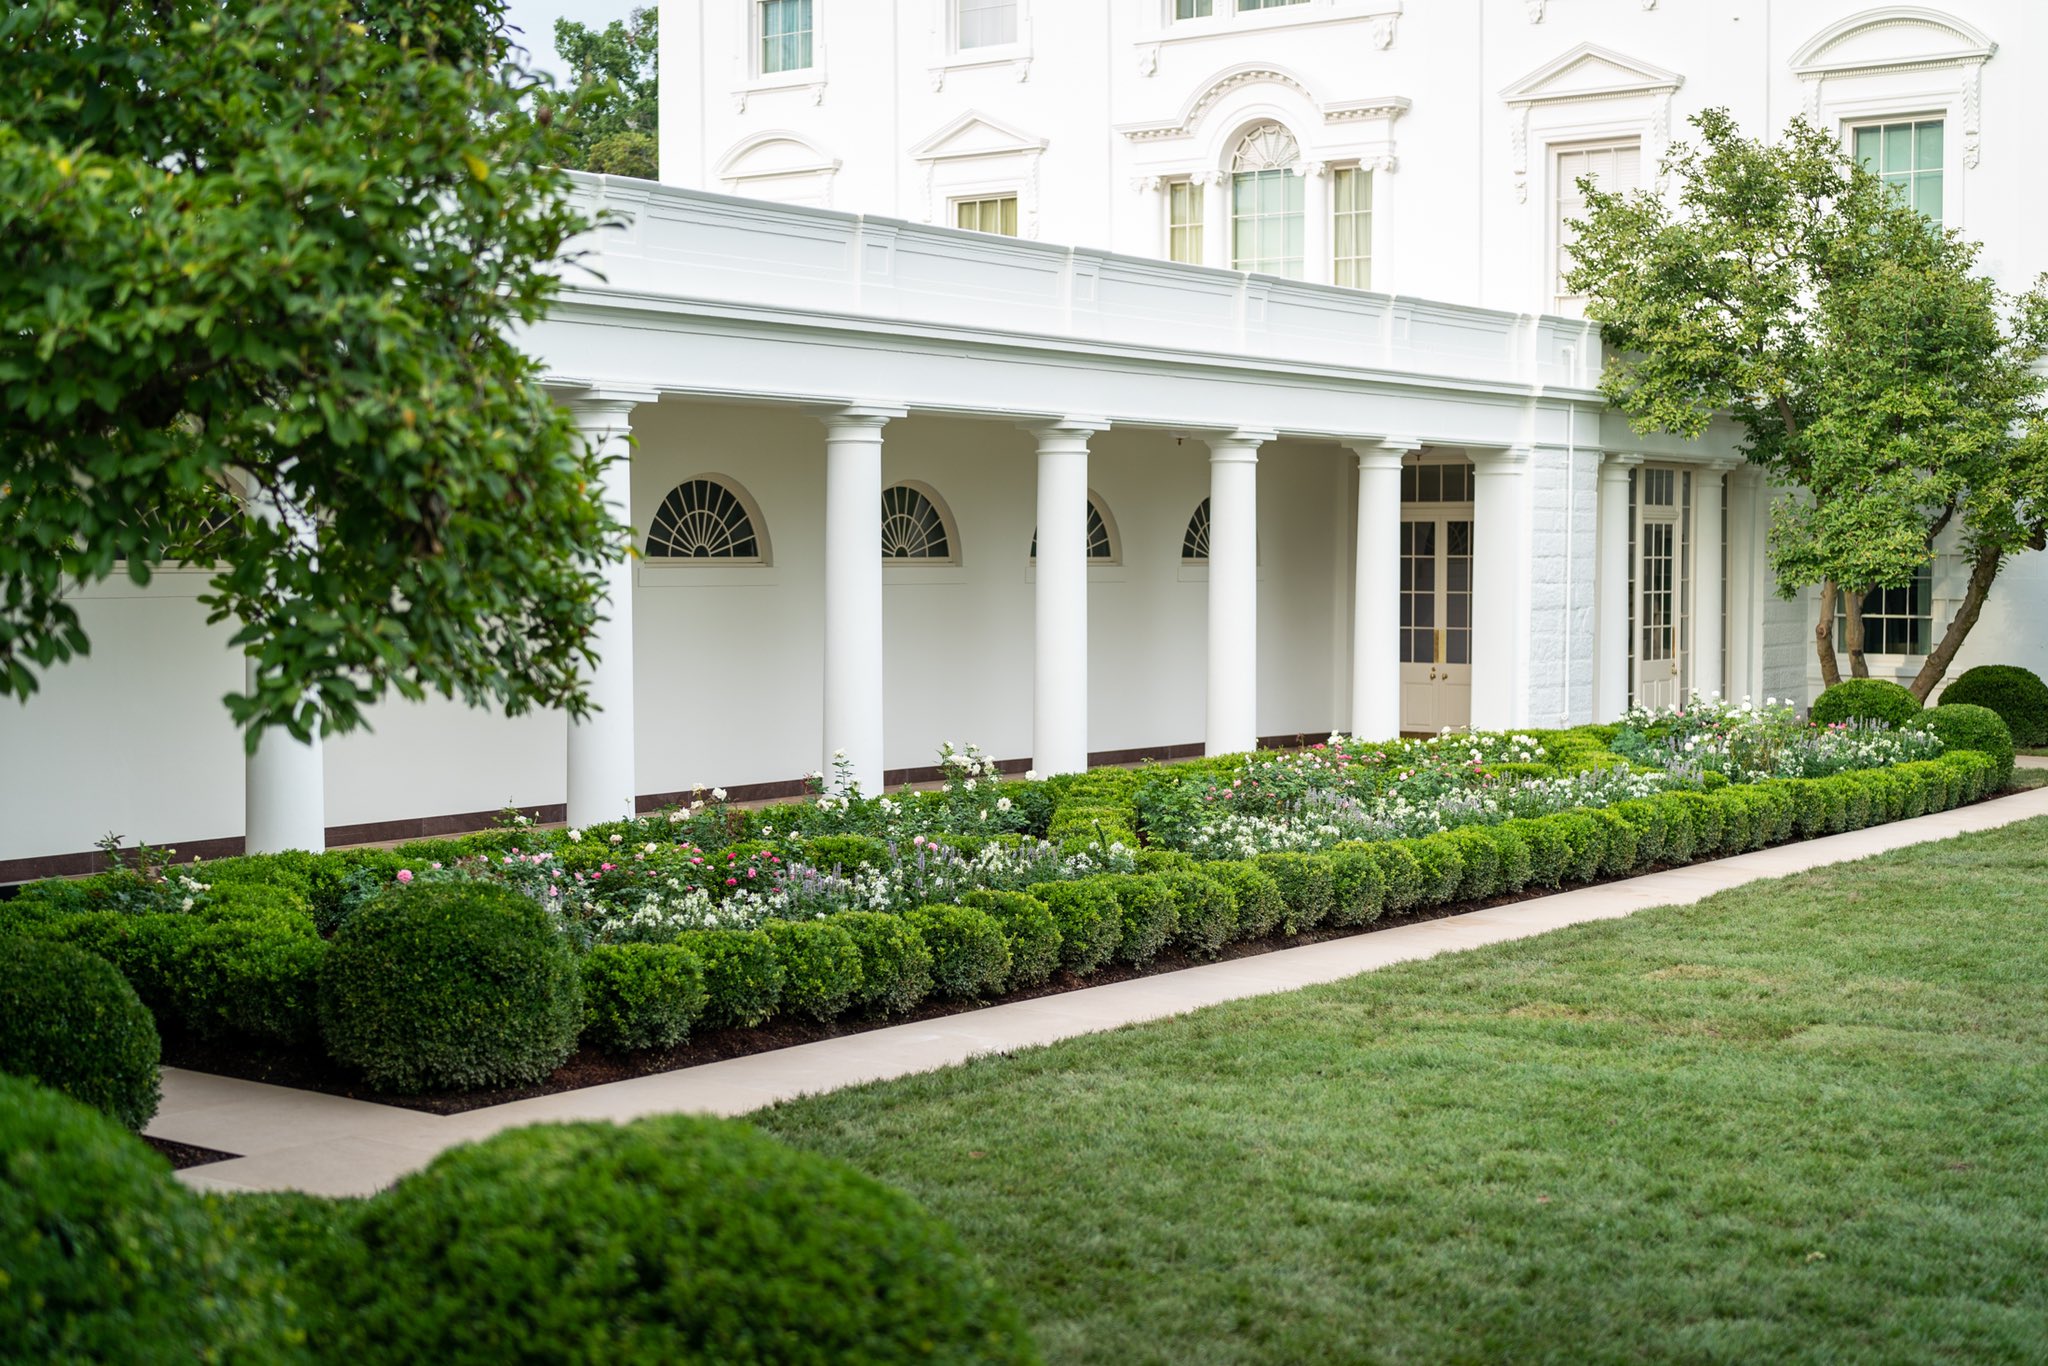 Melania Trump 45 Archived On Twitter Excited To Honor History Celebrate The Future In Our Beautiful Whitehouse Rose Garden This Evening Thank You To All Who Helped Renew This Iconic